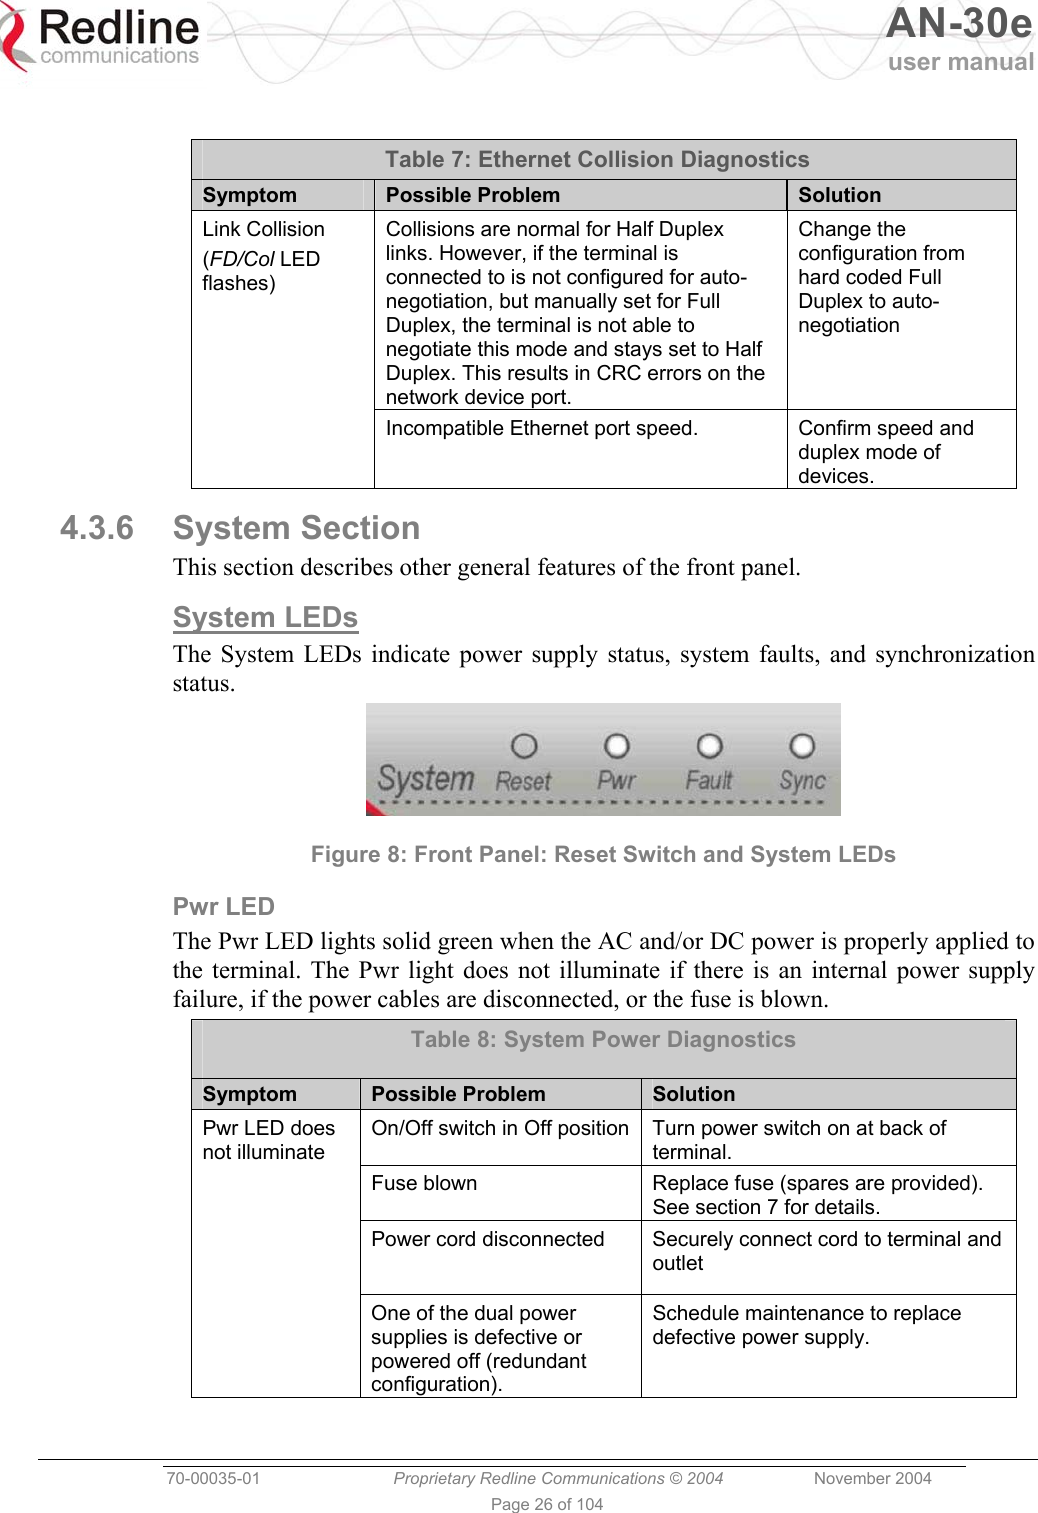   AN-30e user manual  70-00035-01  Proprietary Redline Communications © 2004 November 2004   Page 26 of 104  Table 7: Ethernet Collision Diagnostics Symptom  Possible Problem  Solution Collisions are normal for Half Duplex links. However, if the terminal is connected to is not configured for auto-negotiation, but manually set for Full Duplex, the terminal is not able to negotiate this mode and stays set to Half Duplex. This results in CRC errors on the network device port. Change the configuration from hard coded Full Duplex to auto-negotiation Link Collision (FD/Col LED flashes) Incompatible Ethernet port speed.  Confirm speed and duplex mode of devices. 4.3.6 System Section This section describes other general features of the front panel. System LEDs The System LEDs indicate power supply status, system faults, and synchronization status.  Figure 8: Front Panel: Reset Switch and System LEDs Pwr LED The Pwr LED lights solid green when the AC and/or DC power is properly applied to the terminal. The Pwr light does not illuminate if there is an internal power supply failure, if the power cables are disconnected, or the fuse is blown. Table 8: System Power Diagnostics Symptom  Possible Problem  Solution On/Off switch in Off position Turn power switch on at back of terminal. Fuse blown  Replace fuse (spares are provided). See section 7 for details. Power cord disconnected  Securely connect cord to terminal and outlet Pwr LED does not illuminate One of the dual power supplies is defective or powered off (redundant configuration). Schedule maintenance to replace defective power supply. 